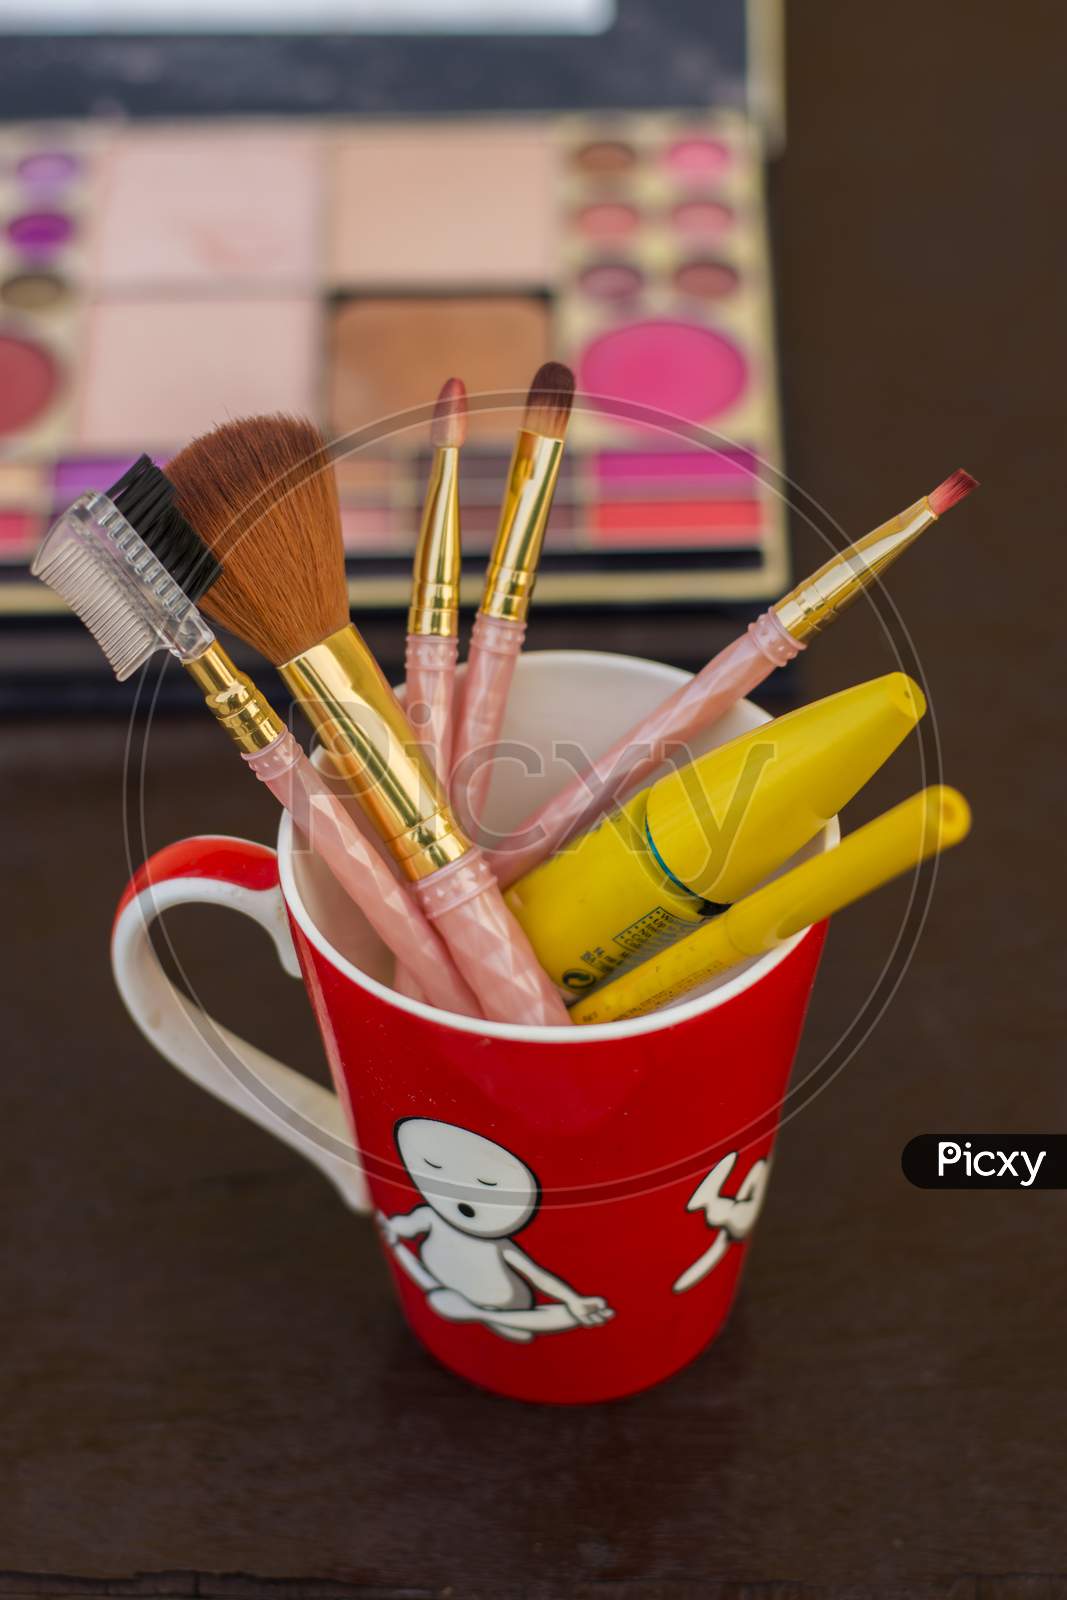 different types of makeup brushes with muskcara and kajol pencil in a red mug selective focus